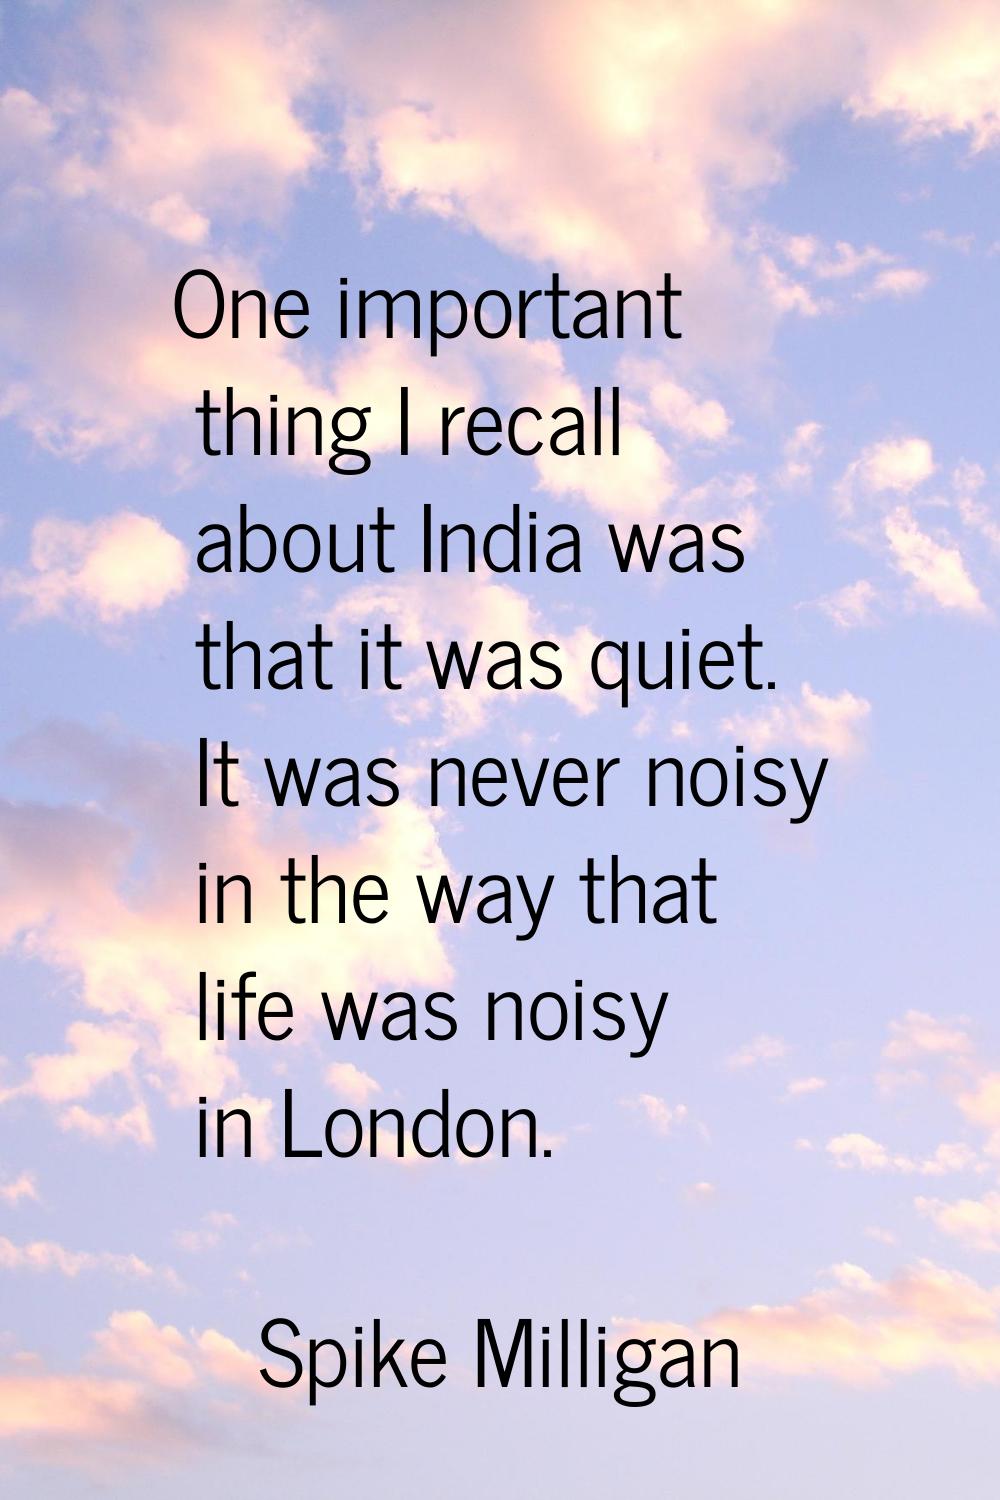 One important thing I recall about India was that it was quiet. It was never noisy in the way that 